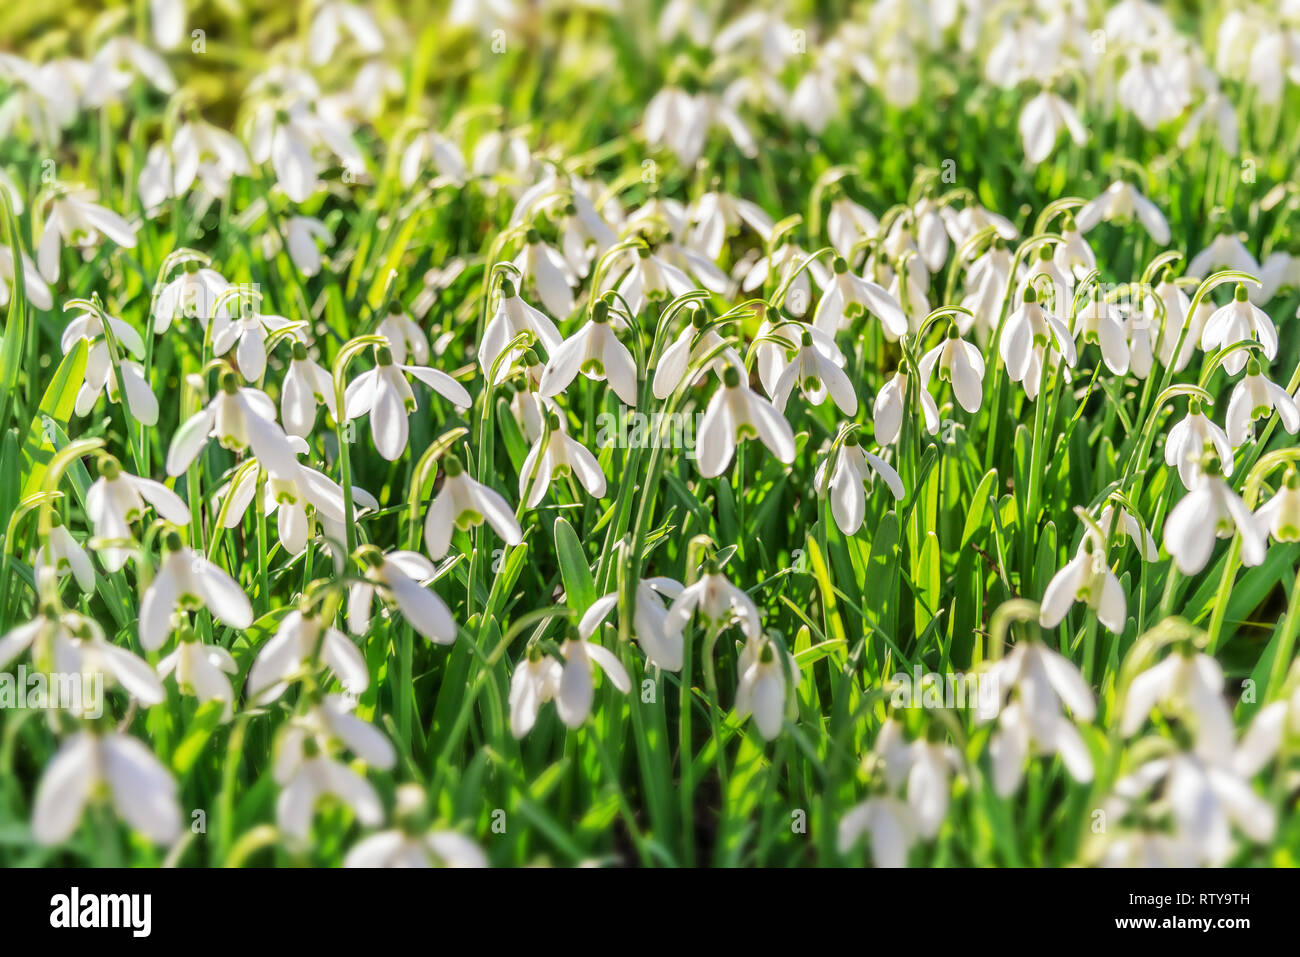 Snowdrop flowers (Galanthus nivalis) in the grass at the beginning of spring Stock Photo